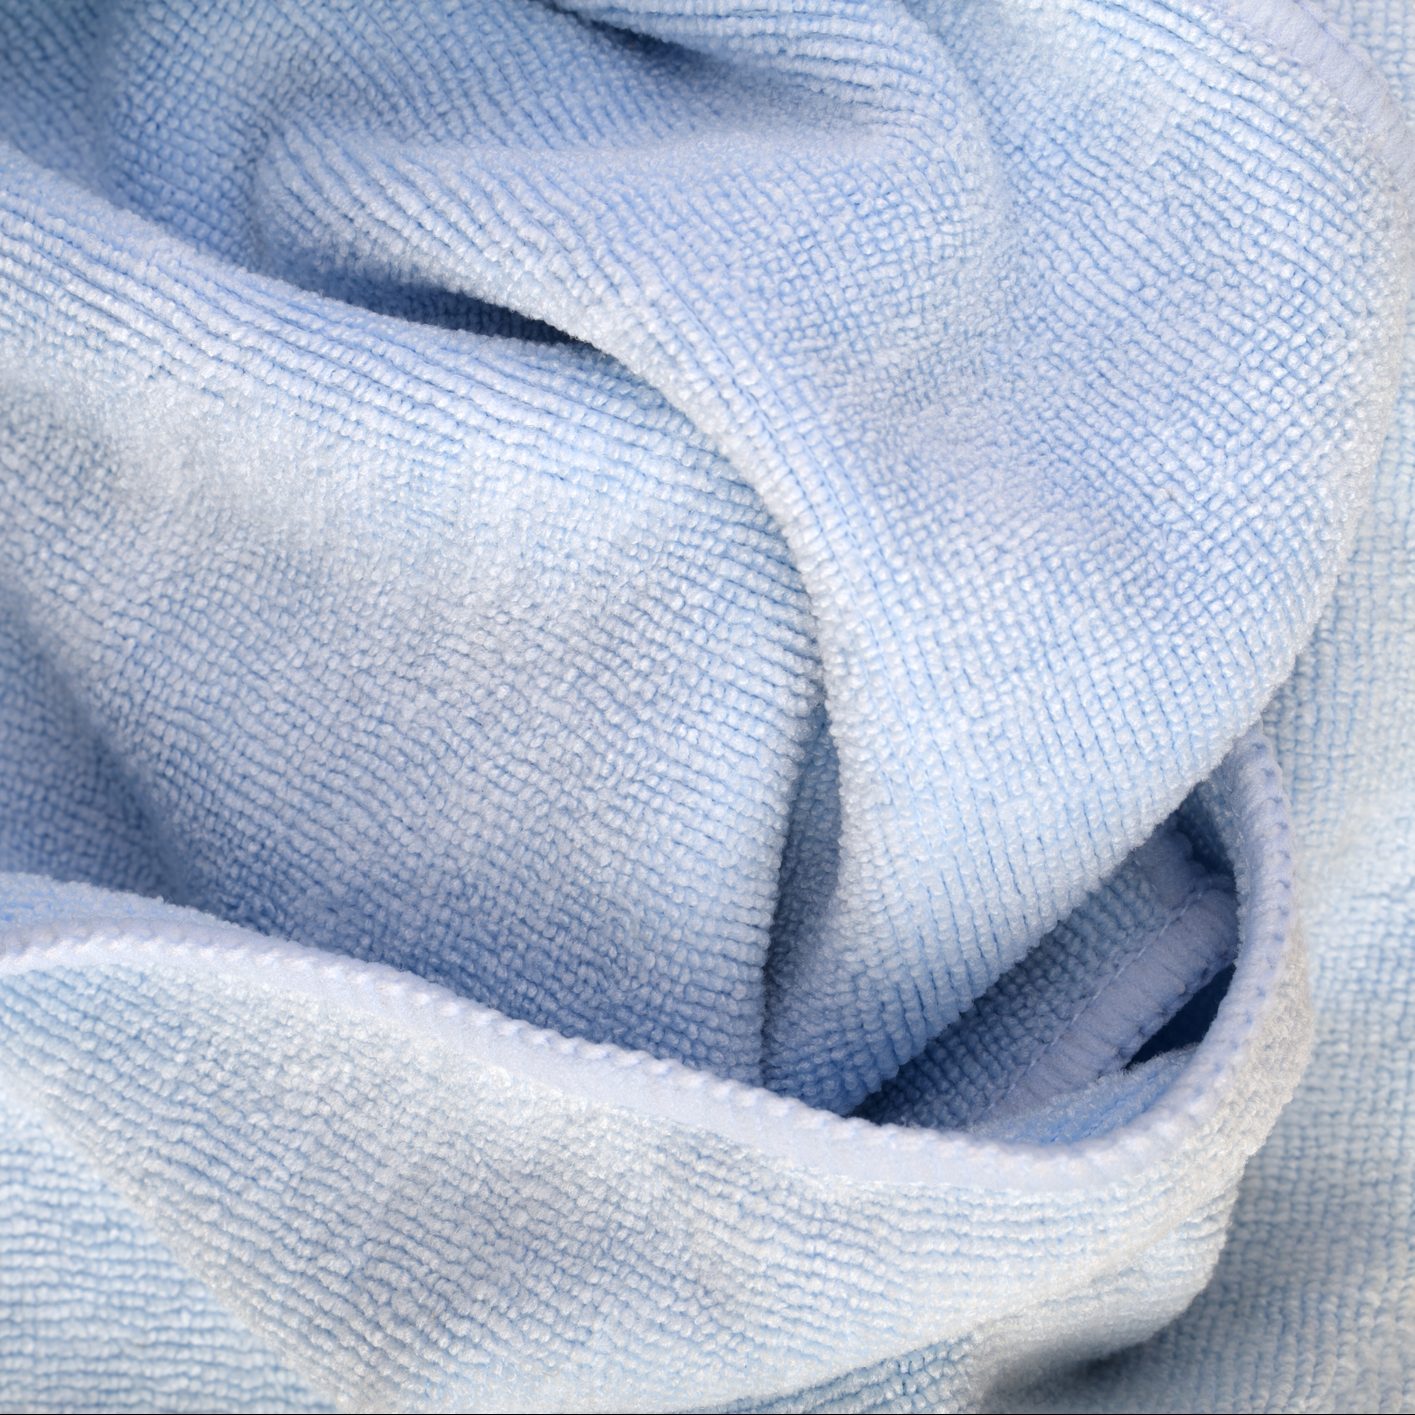 How and When To Use Microfiber Cleaning Cloths | Family Handyman